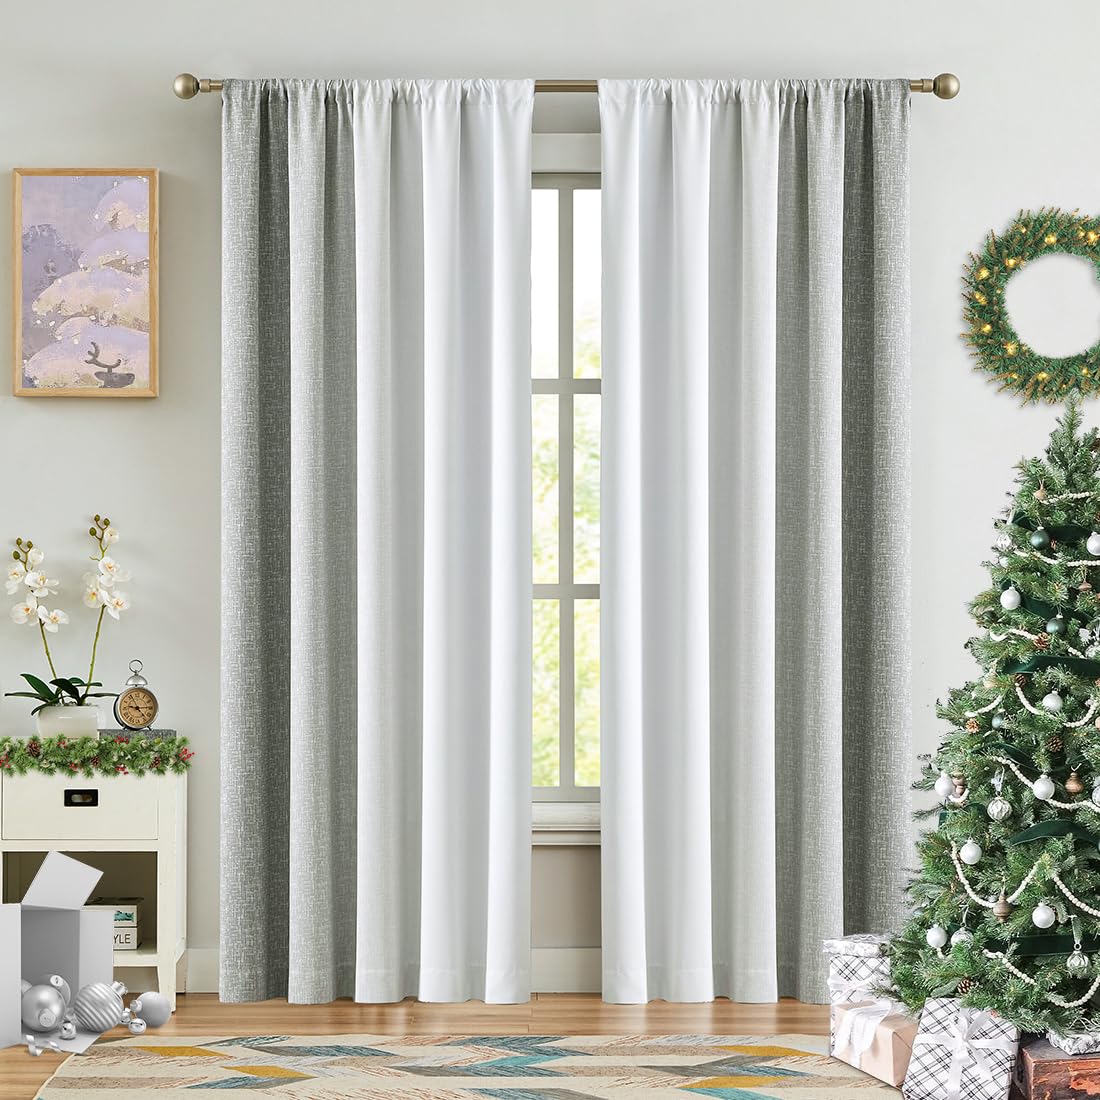 Geomoroccan Ombre Full Blackout Curtains 108 Inches Long, Grey and White Christmas Window Treatments for Bedroom Living Room, Li